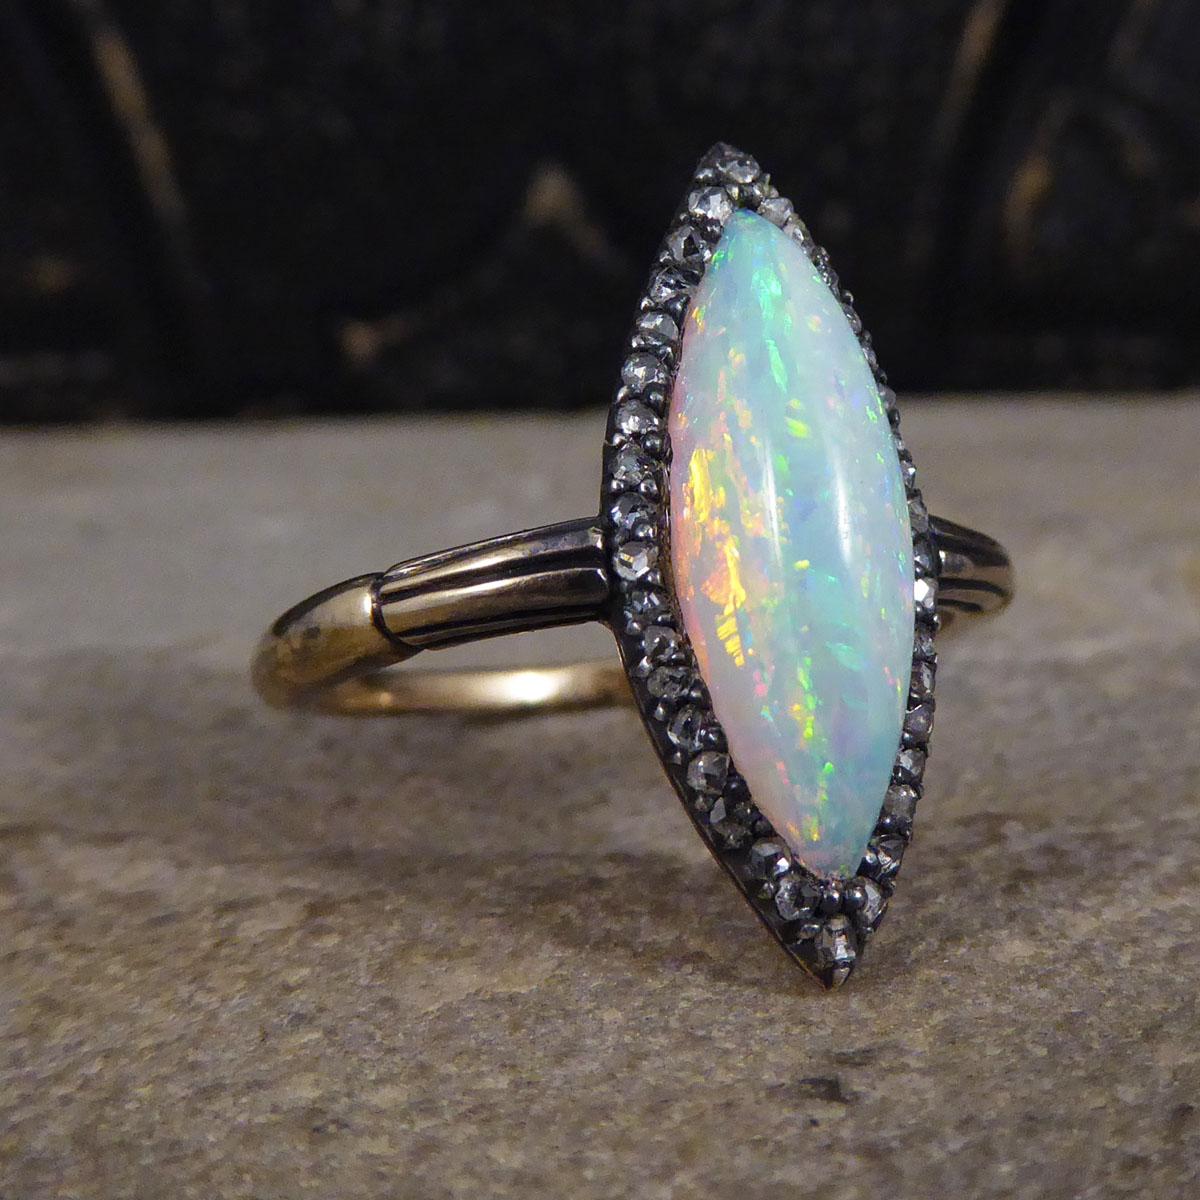 An exquisite and unusual ring for the Edwardian era. This wonderful ring features a lustrous Opal in the centre cut in a marquise shape with great colours reflecting from all angles, showing many greens, blues, oranges and reds. The Opal is